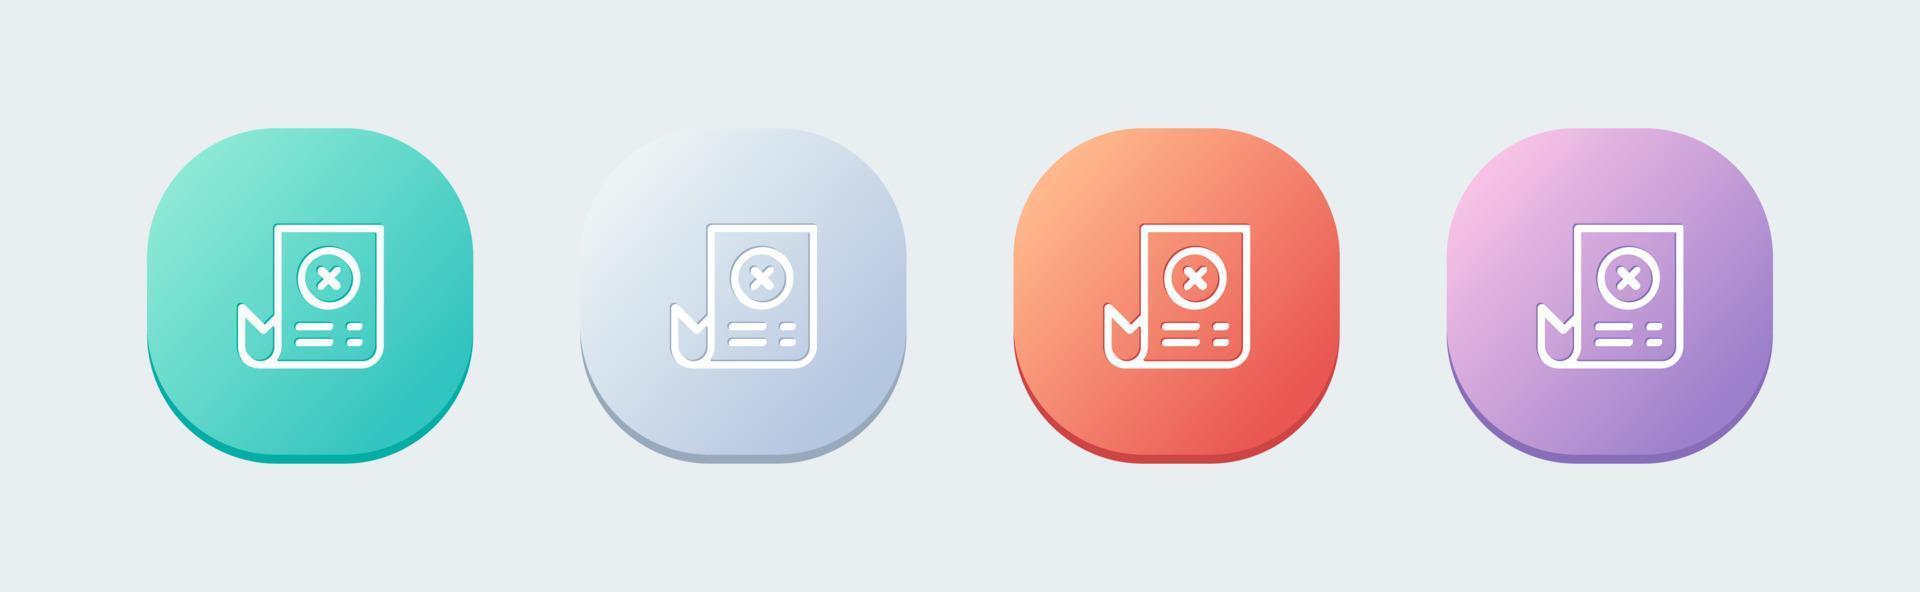 Failed transaction line icon in flat design style. Error signs vector illustration.